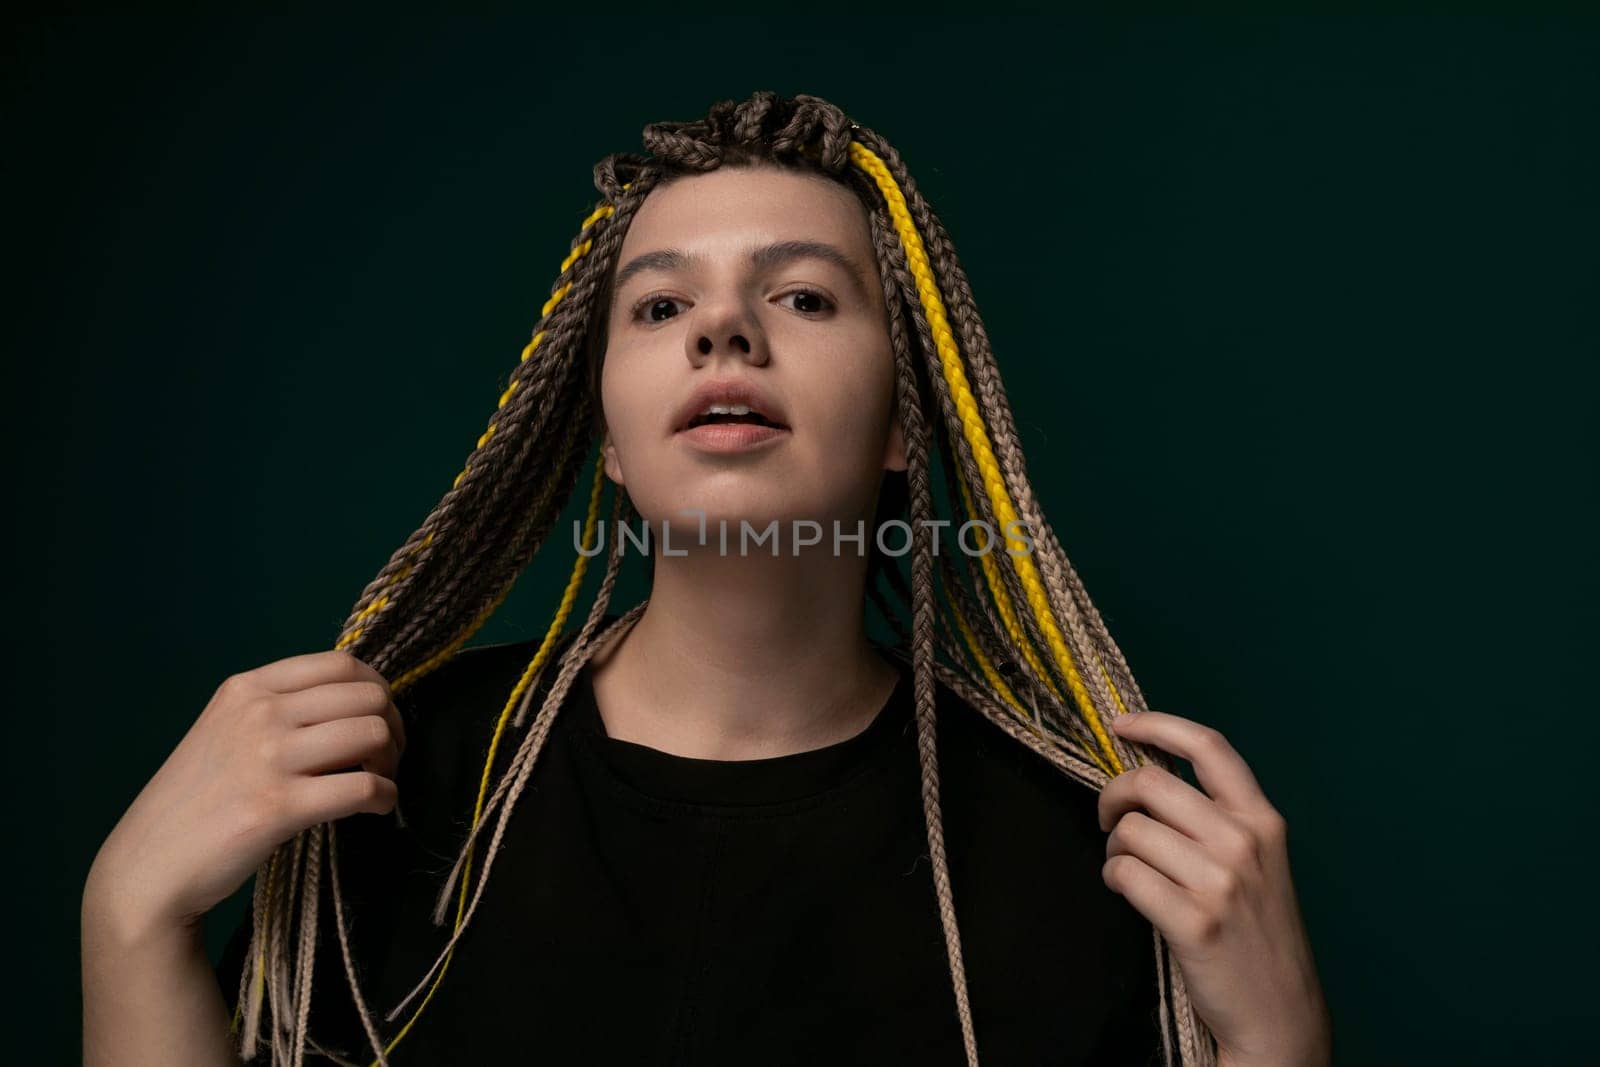 Woman With Dreadlocks Standing in Front of Green Background by TRMK